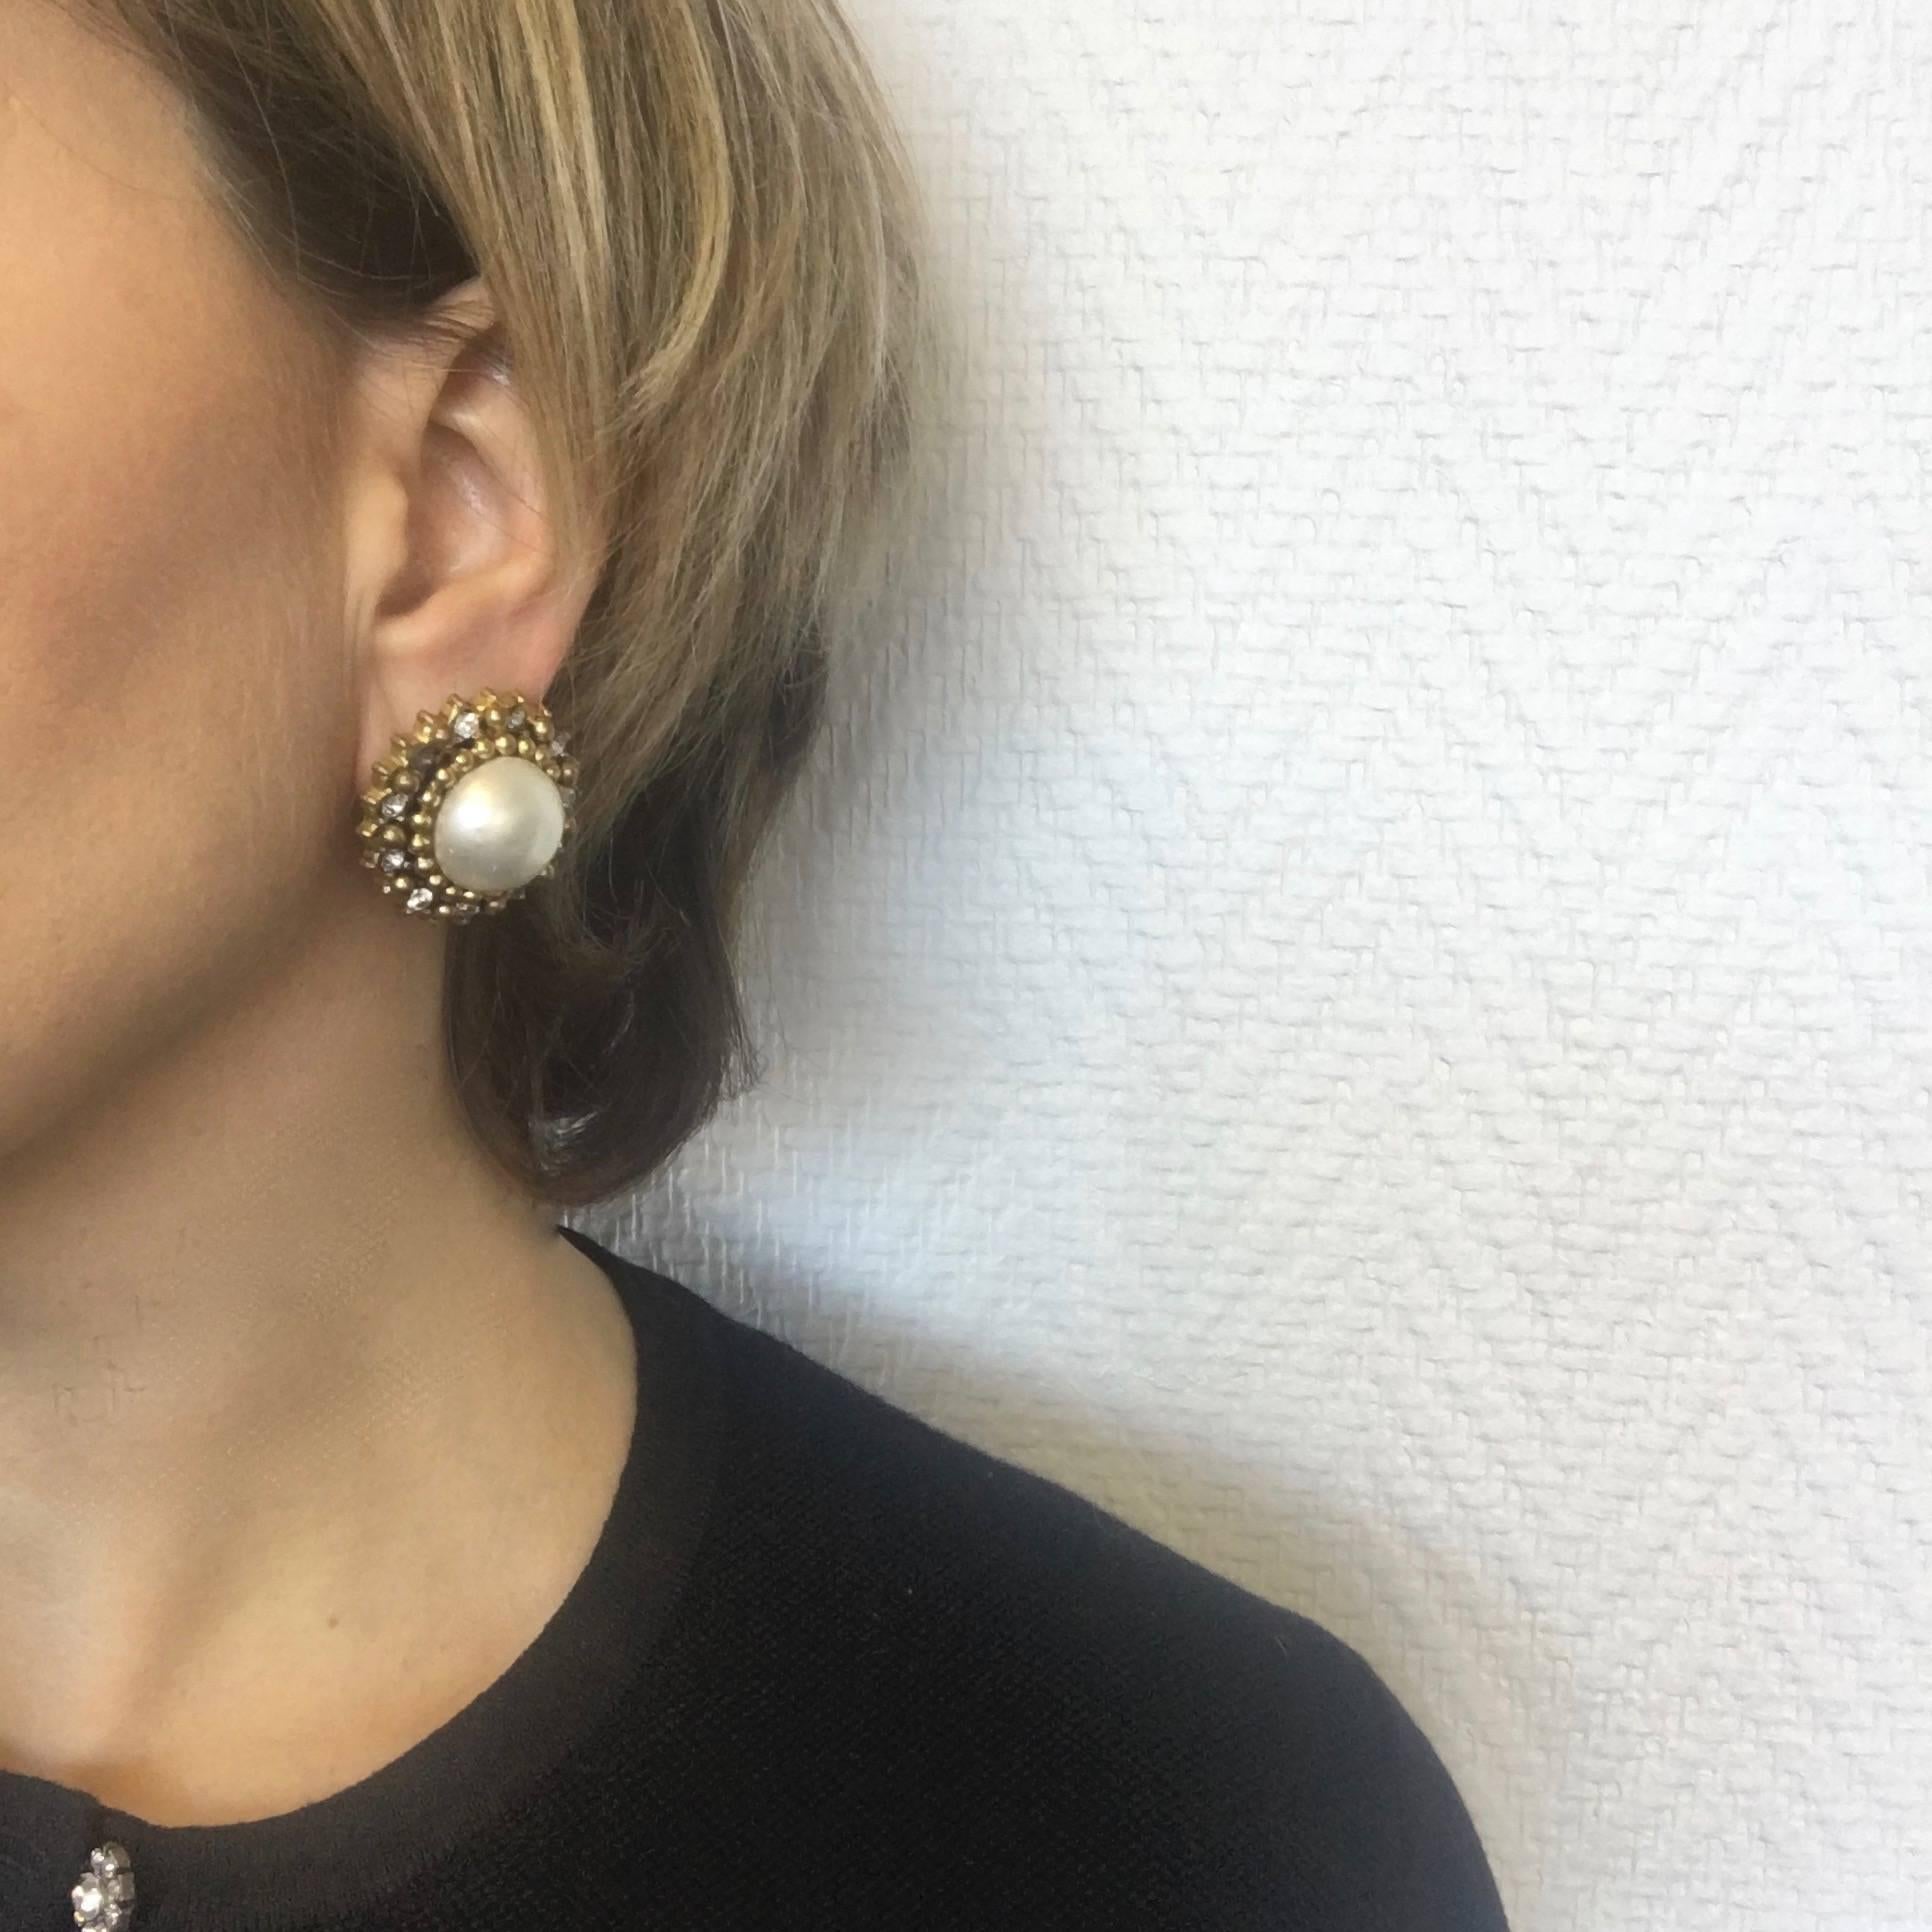 Couture! CHANEL clip-on earrings in aged gold metal, pearl in molten glass surrounded by a row of rhinestones. 

Vintage jewel. In good condition. Micro scratches on the pearl.

Brand engraved on the back.

Dimensions: 3.3 cm in diameter

Will be